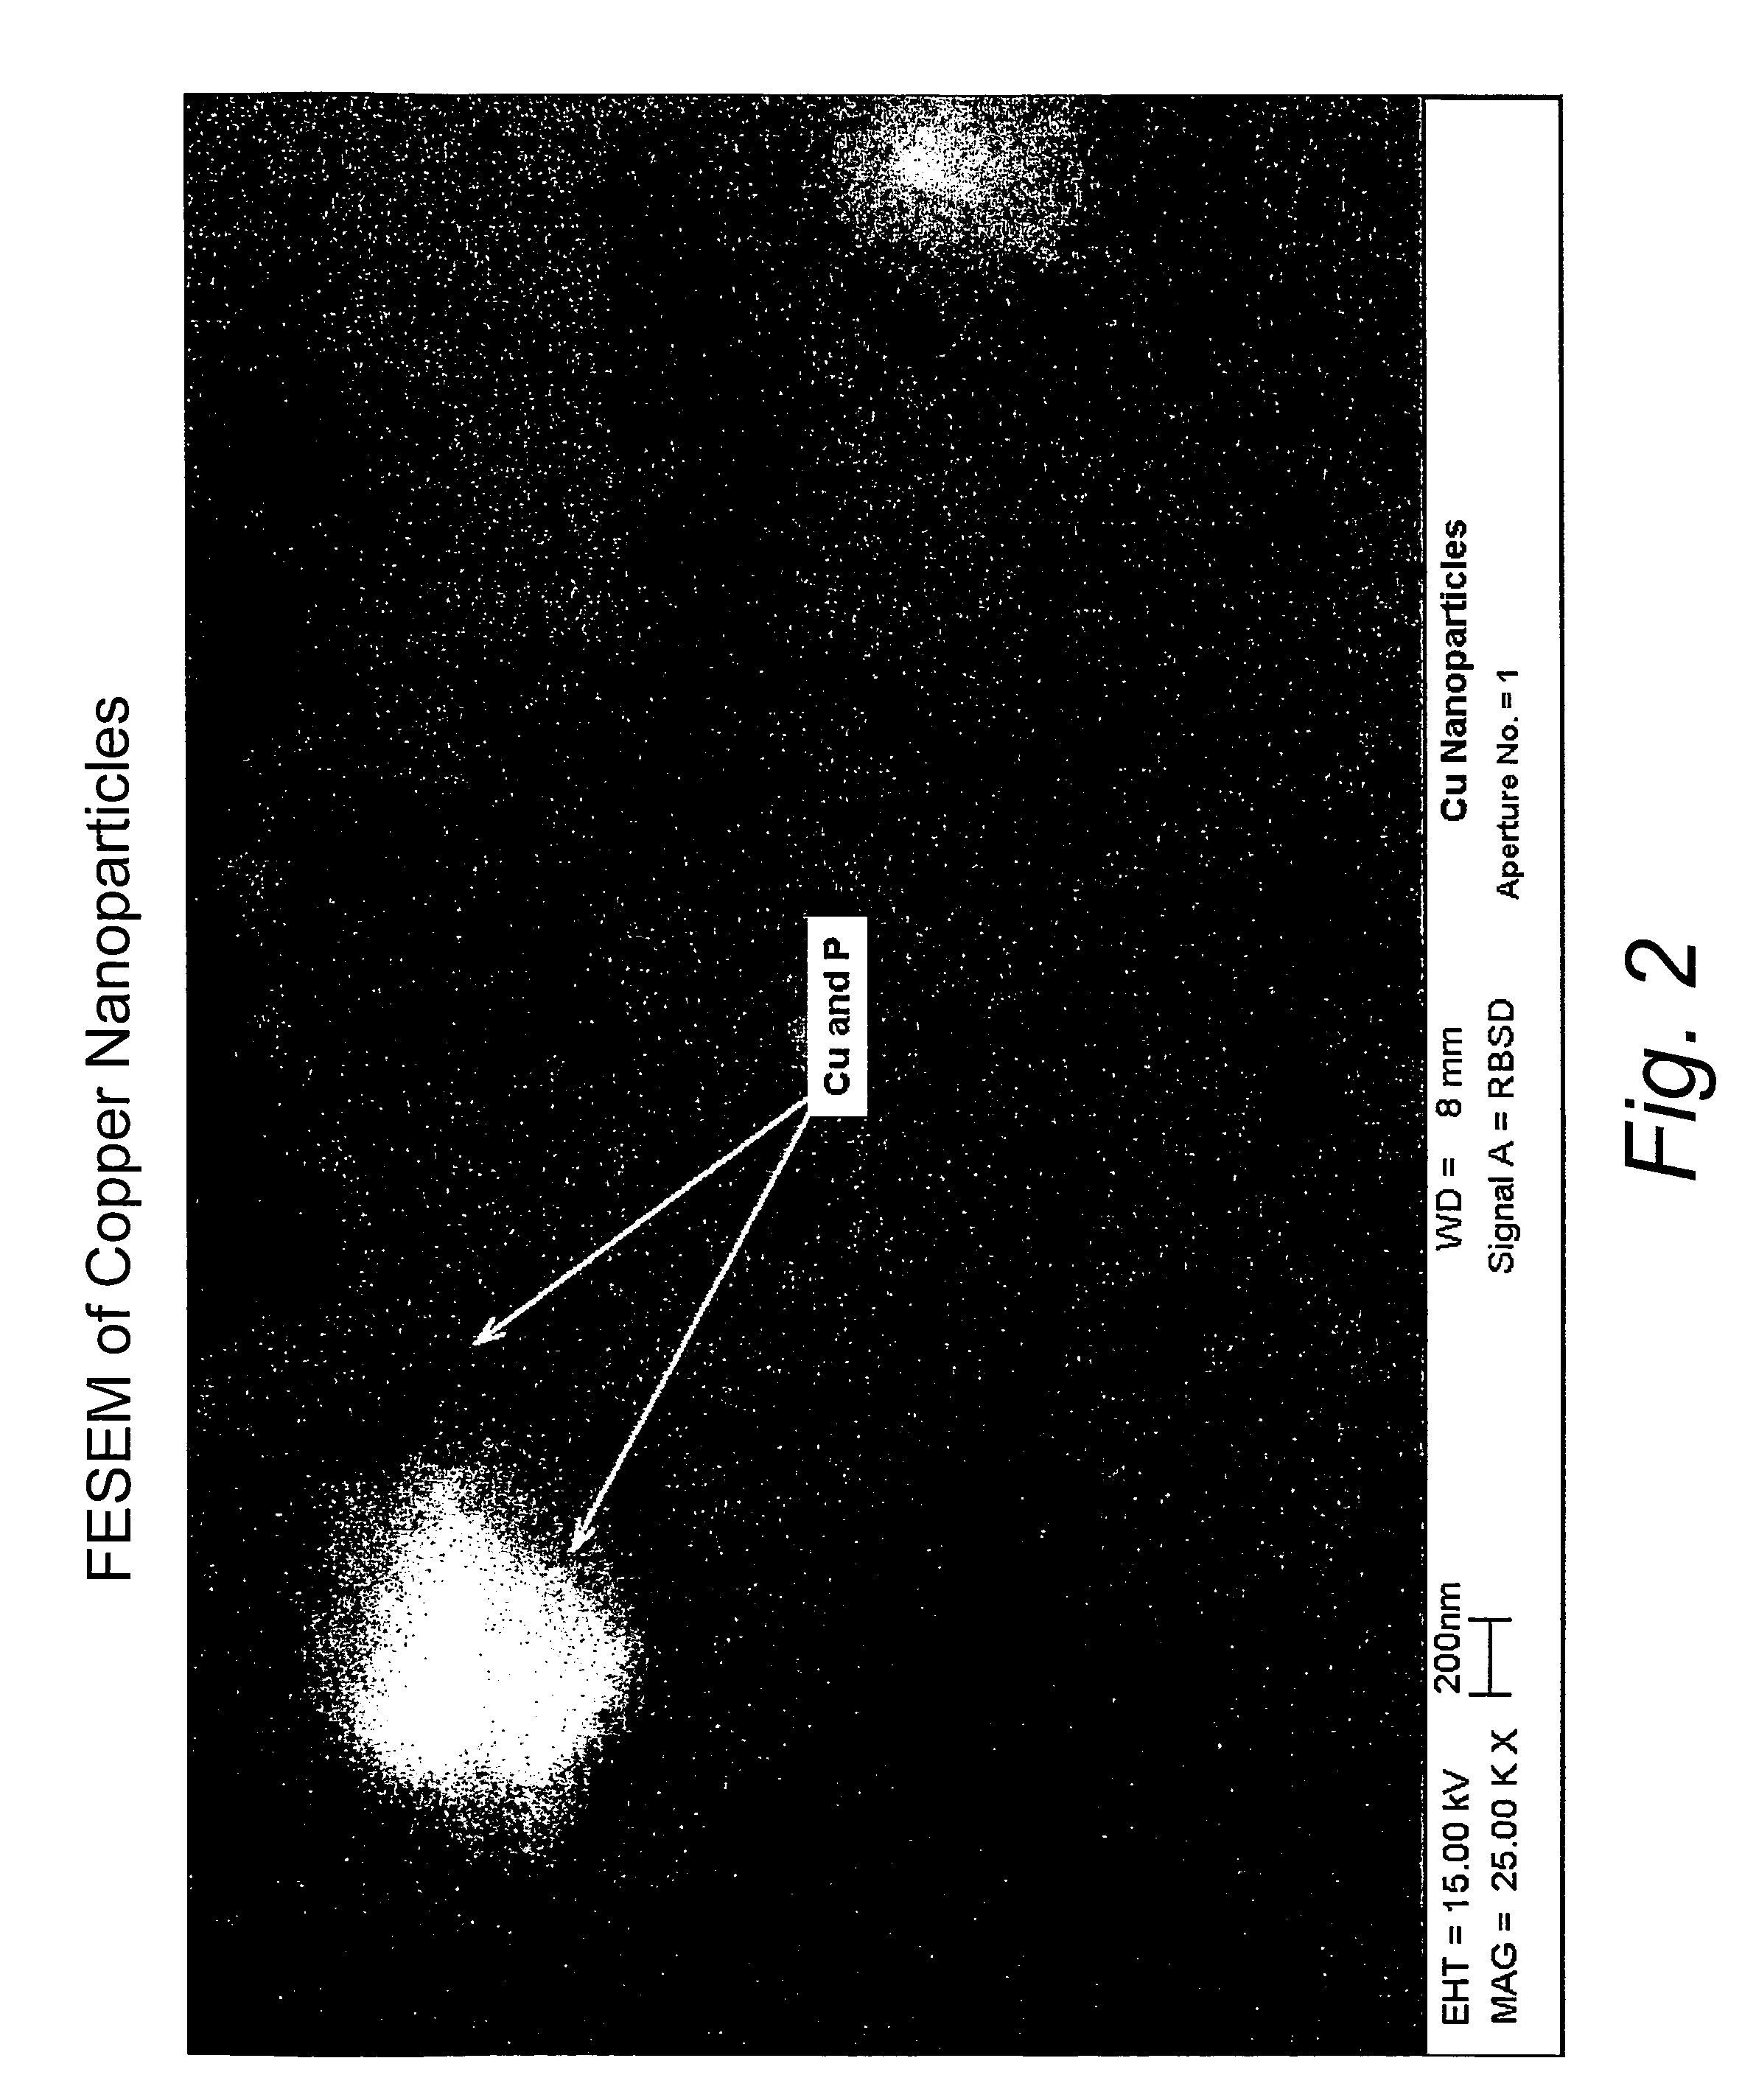 Method of producing particles by physical vapor deposition in an ionic liquid